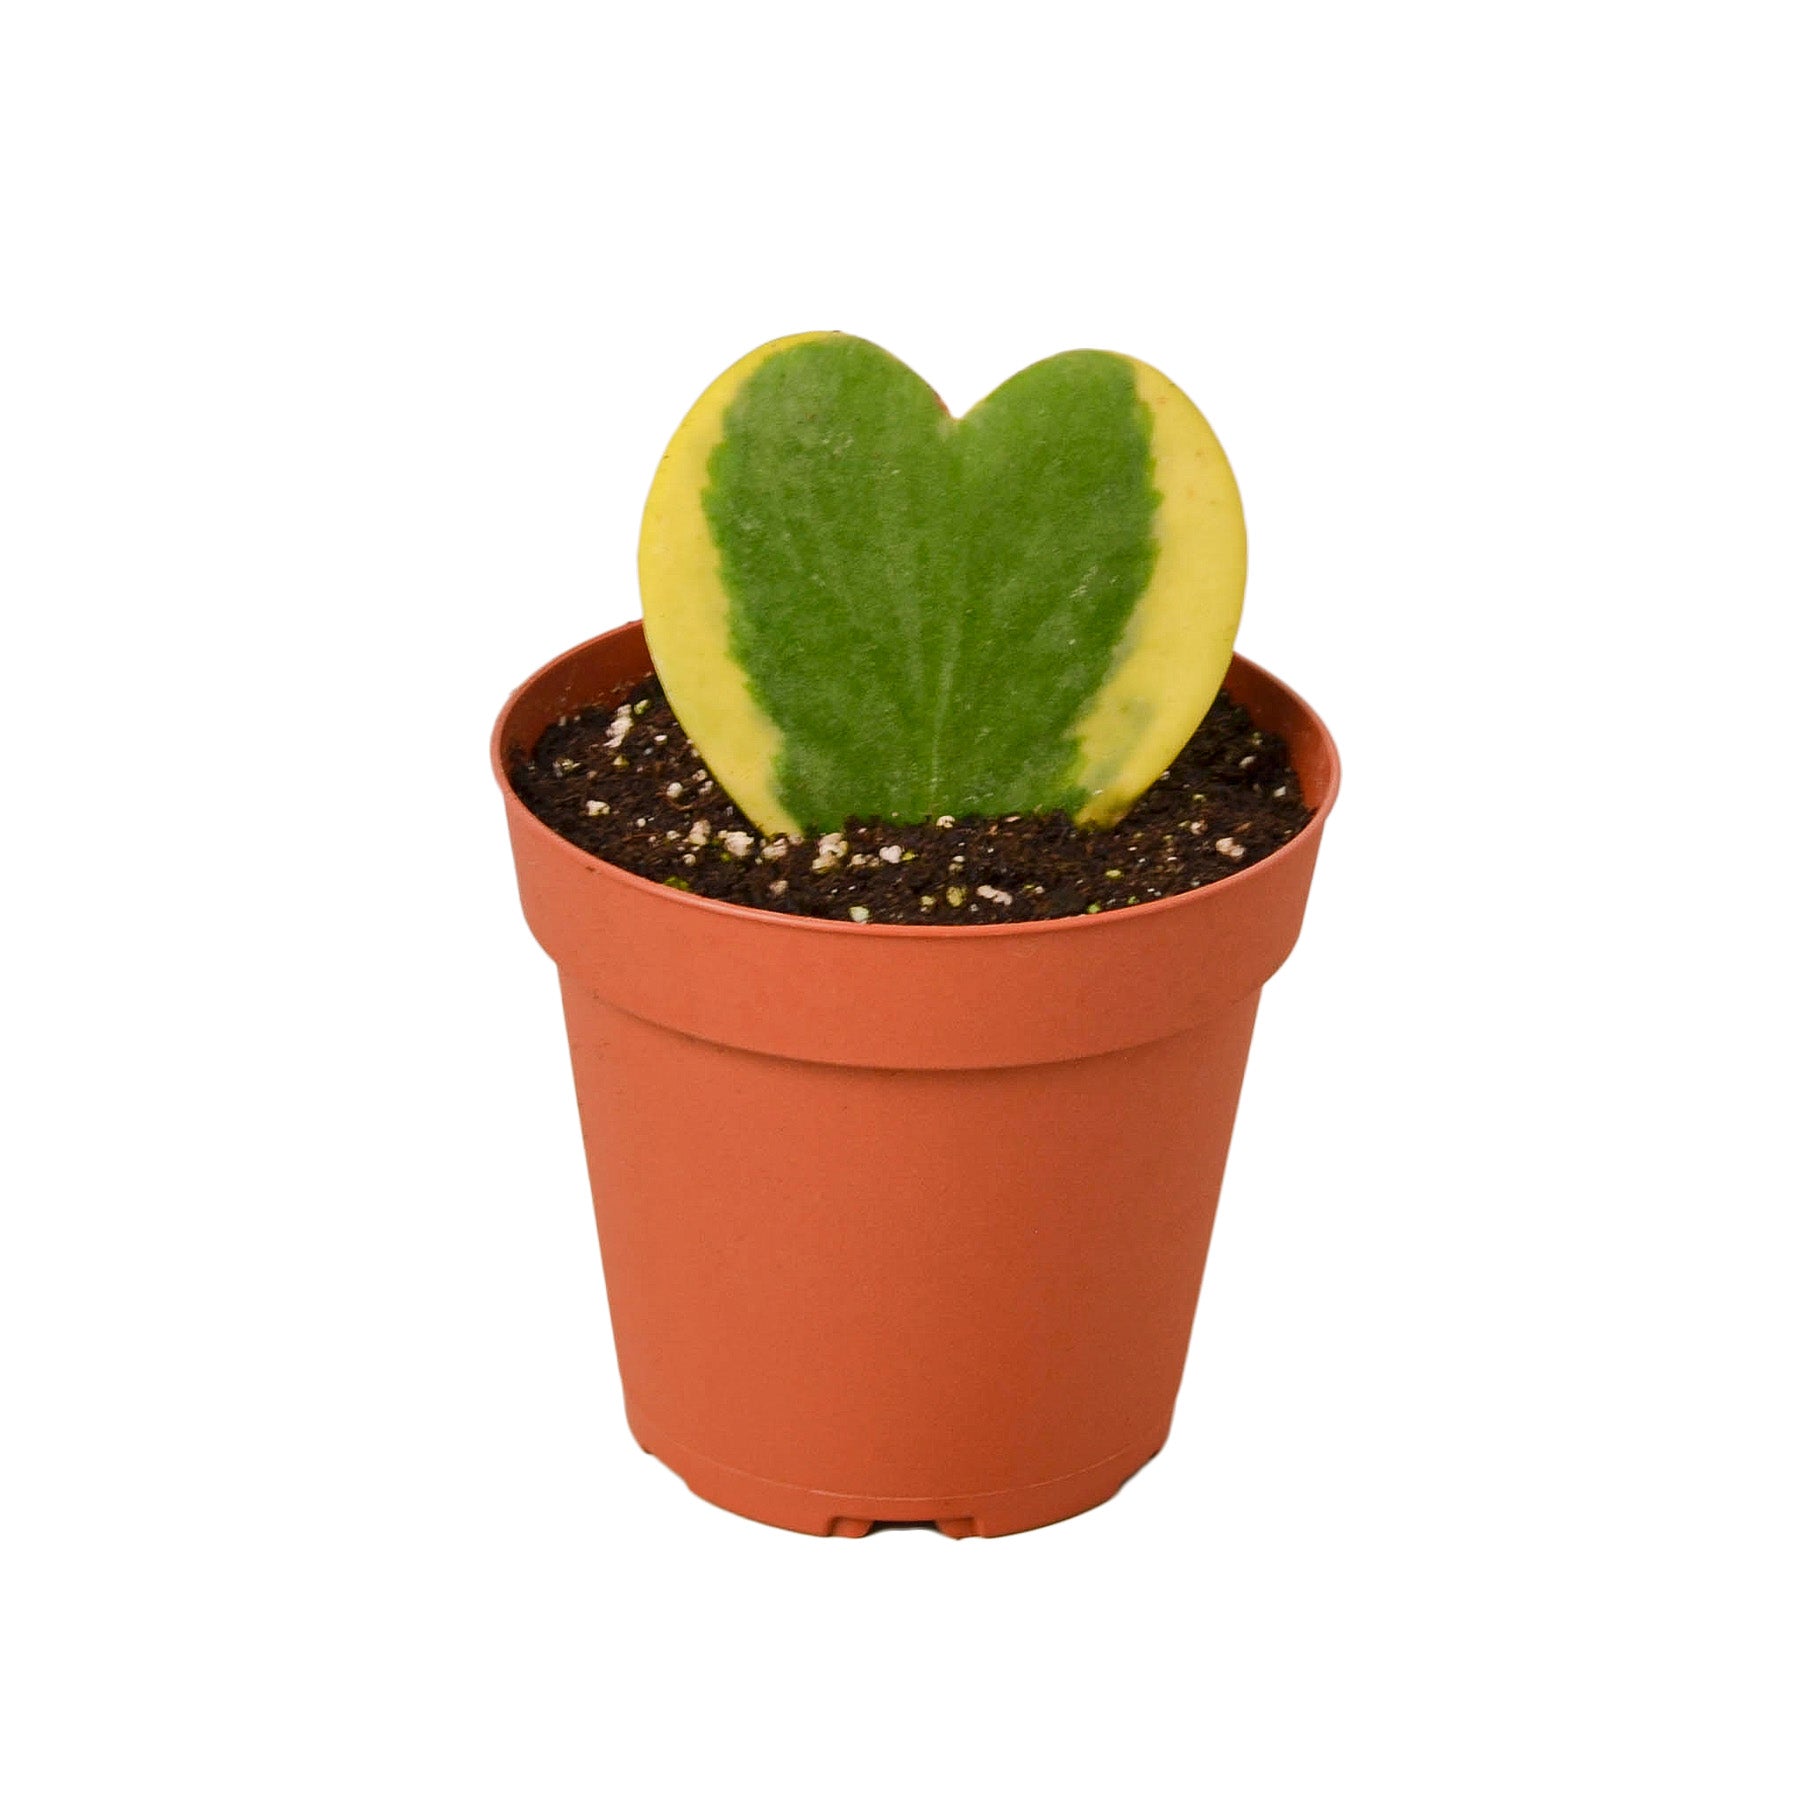 A heart shaped plant in a pot available at the best garden center near me.